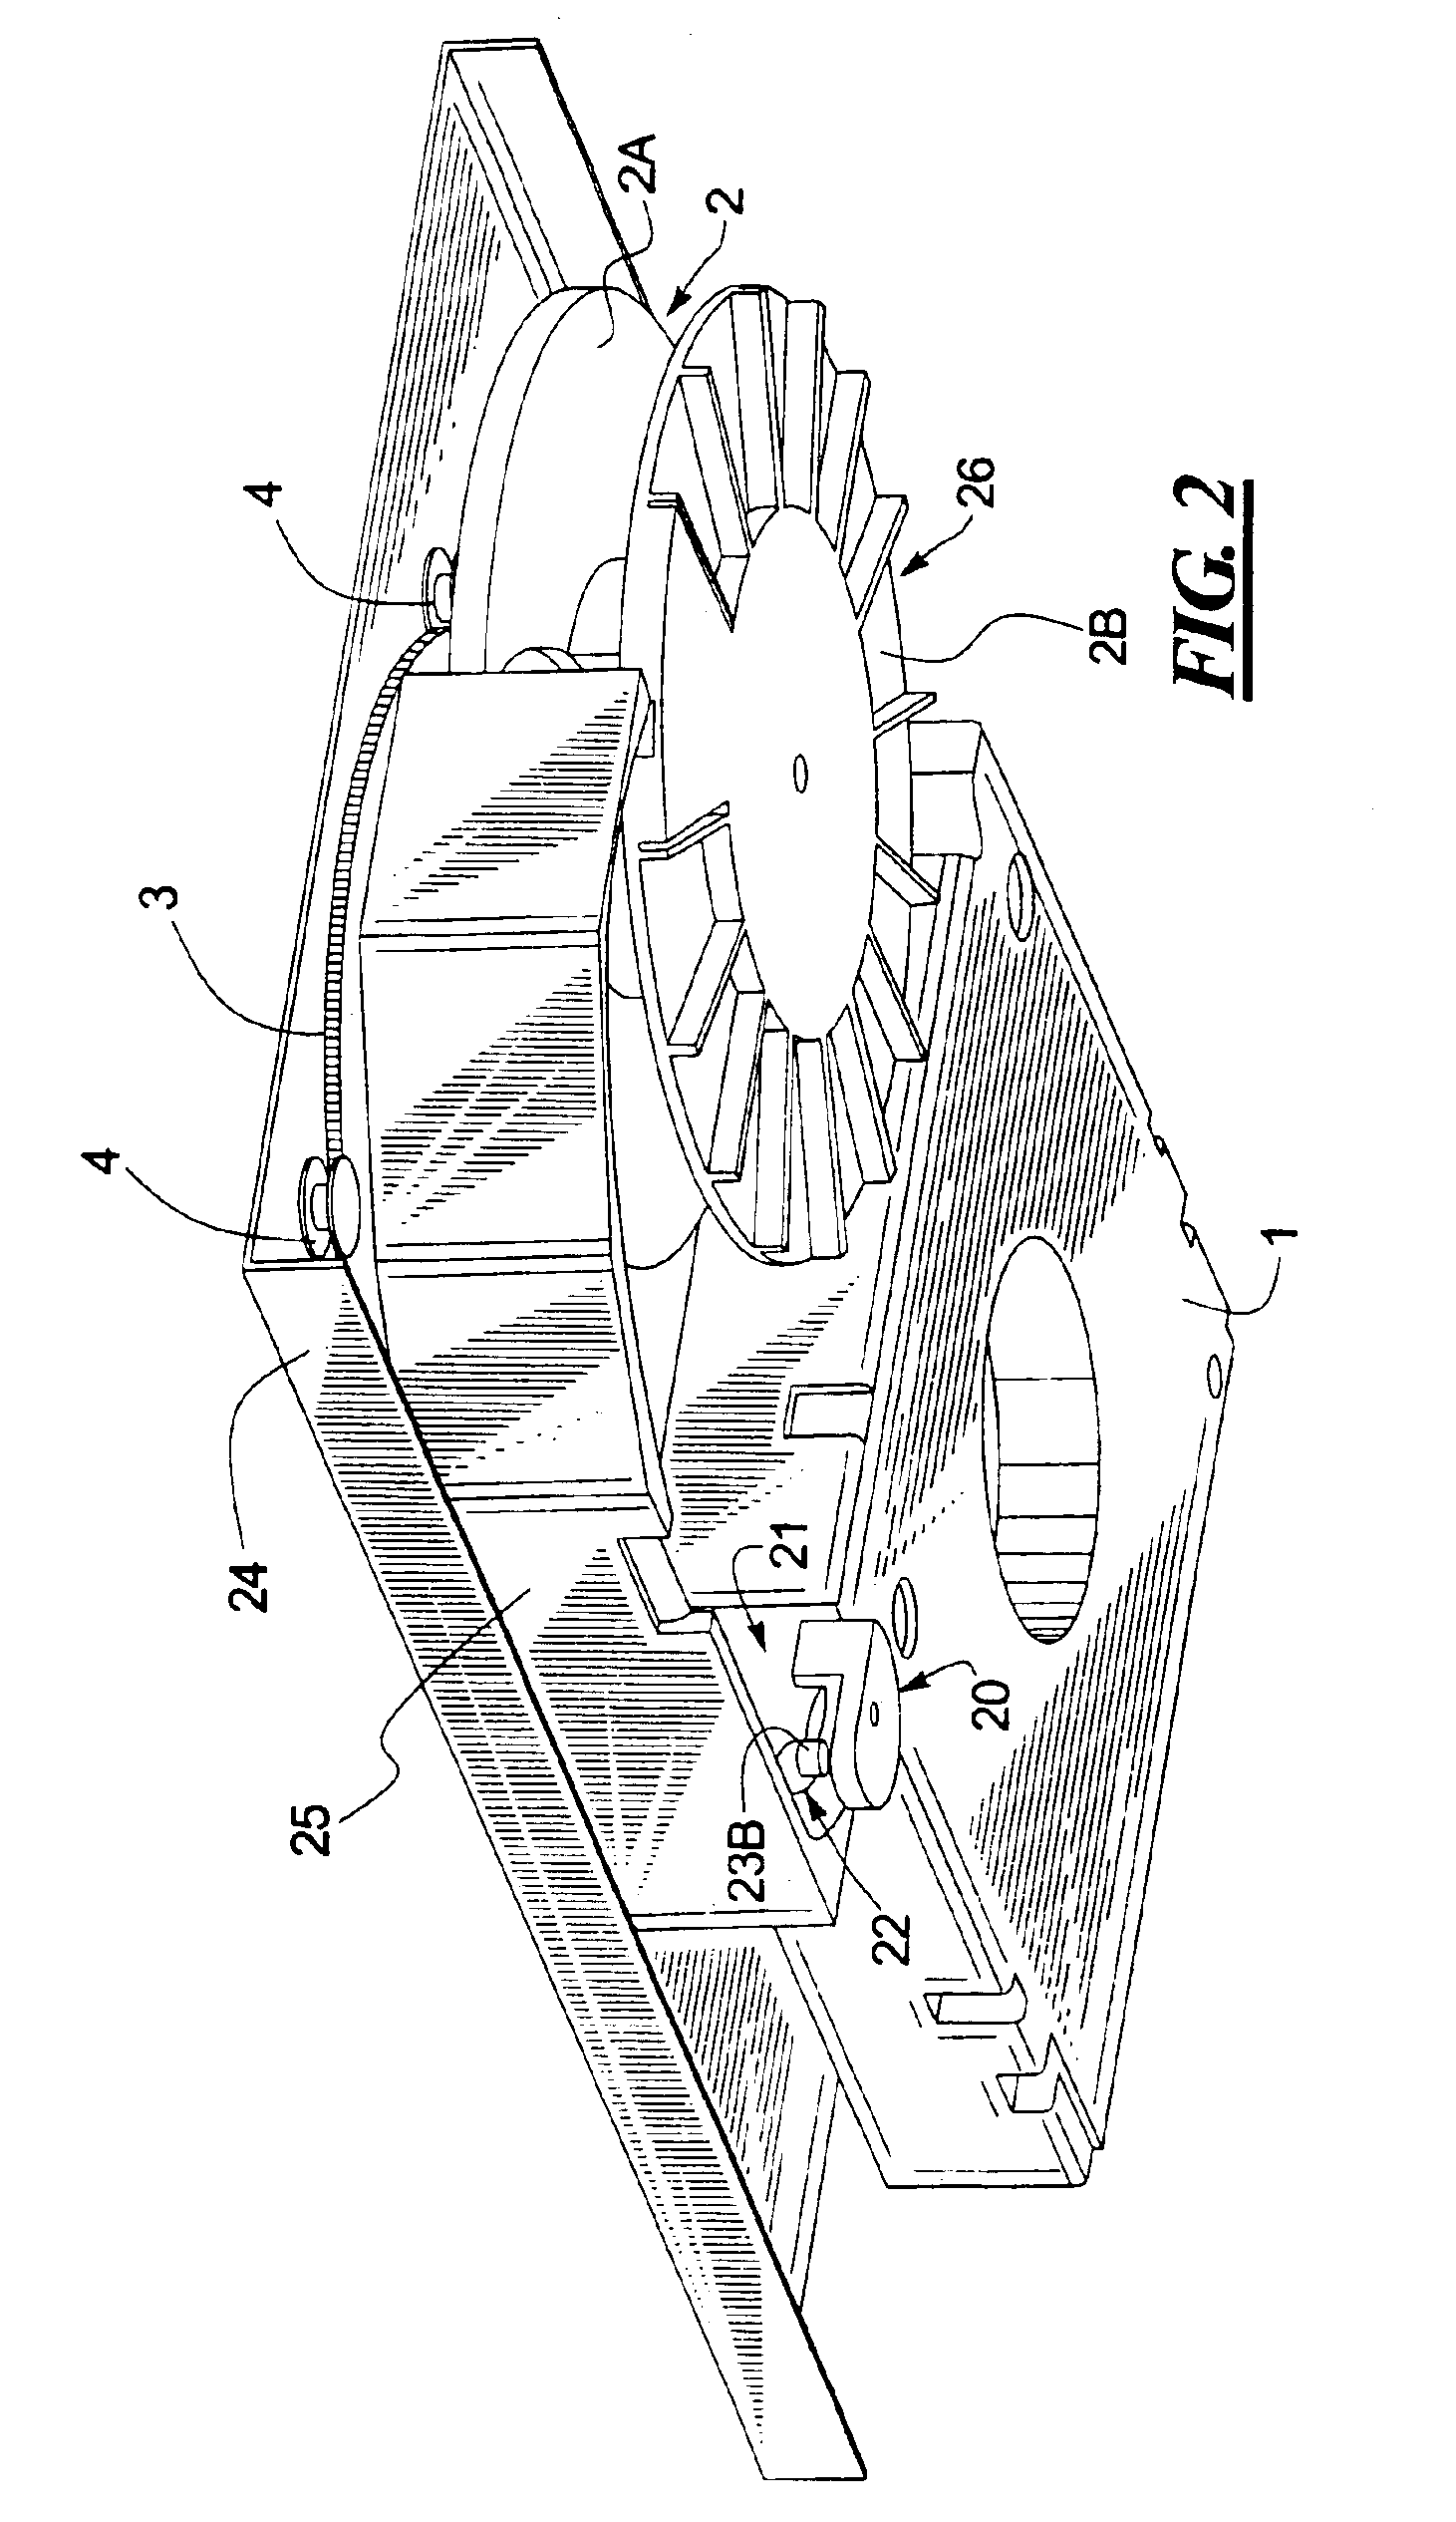 System for extracting magnetic recording tape from a tape cartridge for engagement with a take-up reel